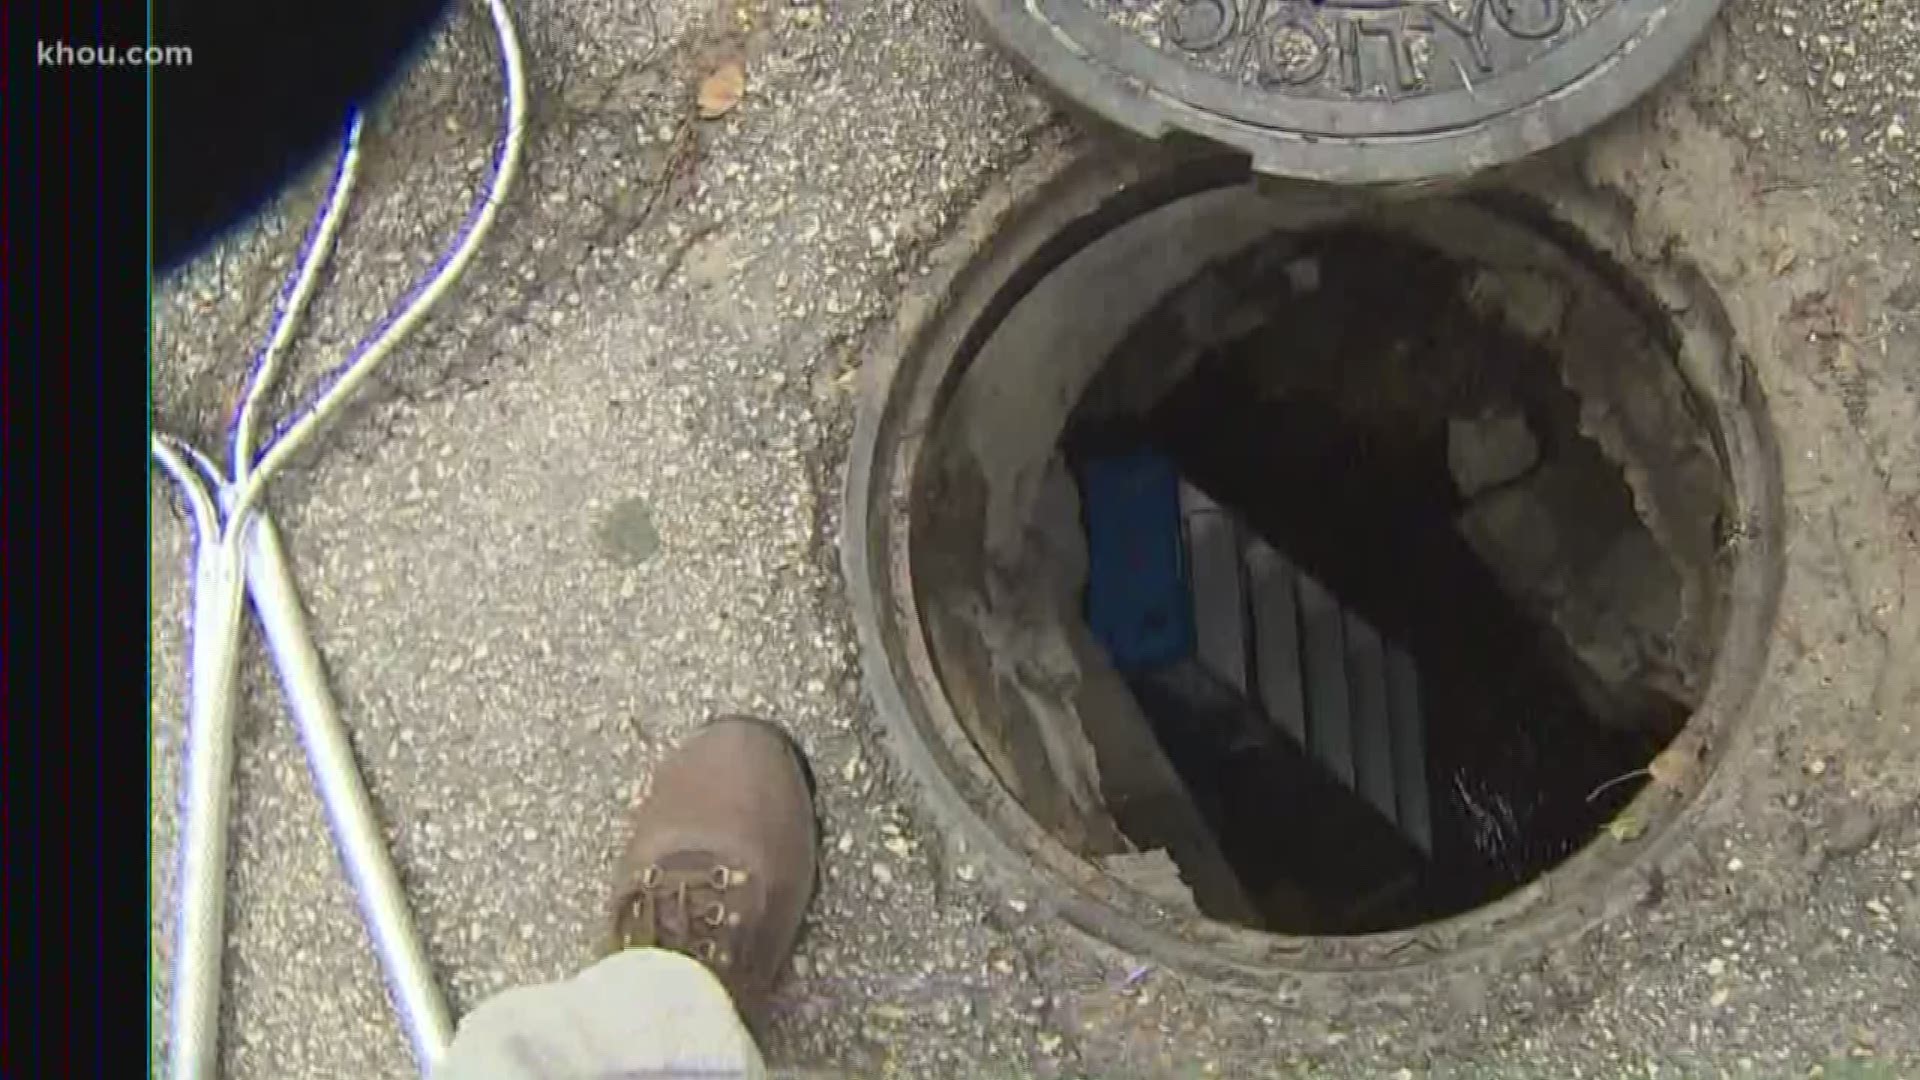 Concerned citizens are trying to rescue some puppies that have apparently been in a storm drain since Thursday. A KHOU 11 News crew is trying to help get the puppies out.